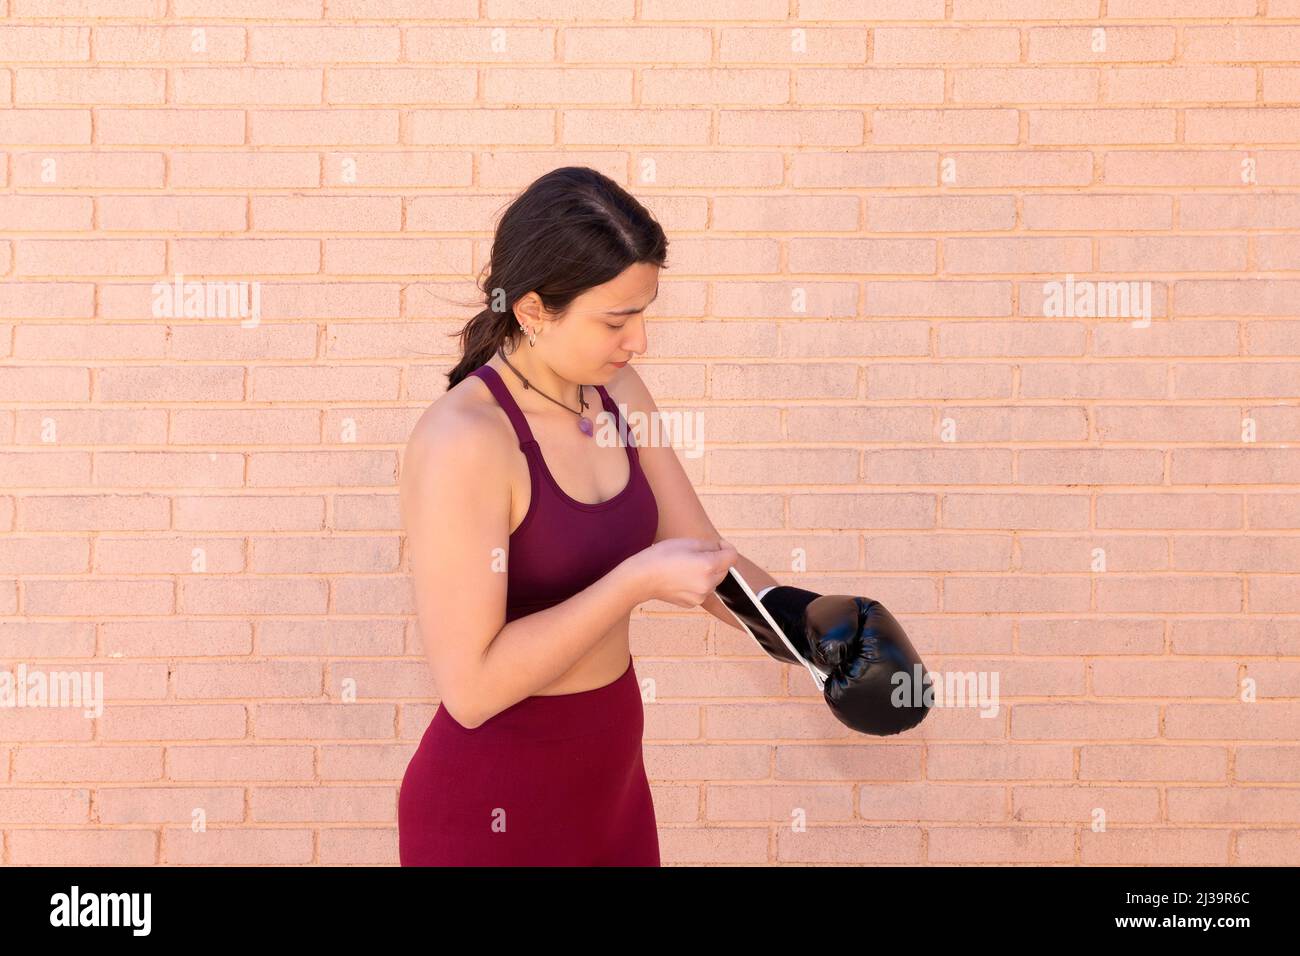 A young Caucasian woman dressed in a top is putting on a black boxing glove in front of a brick wall. Stock Photo